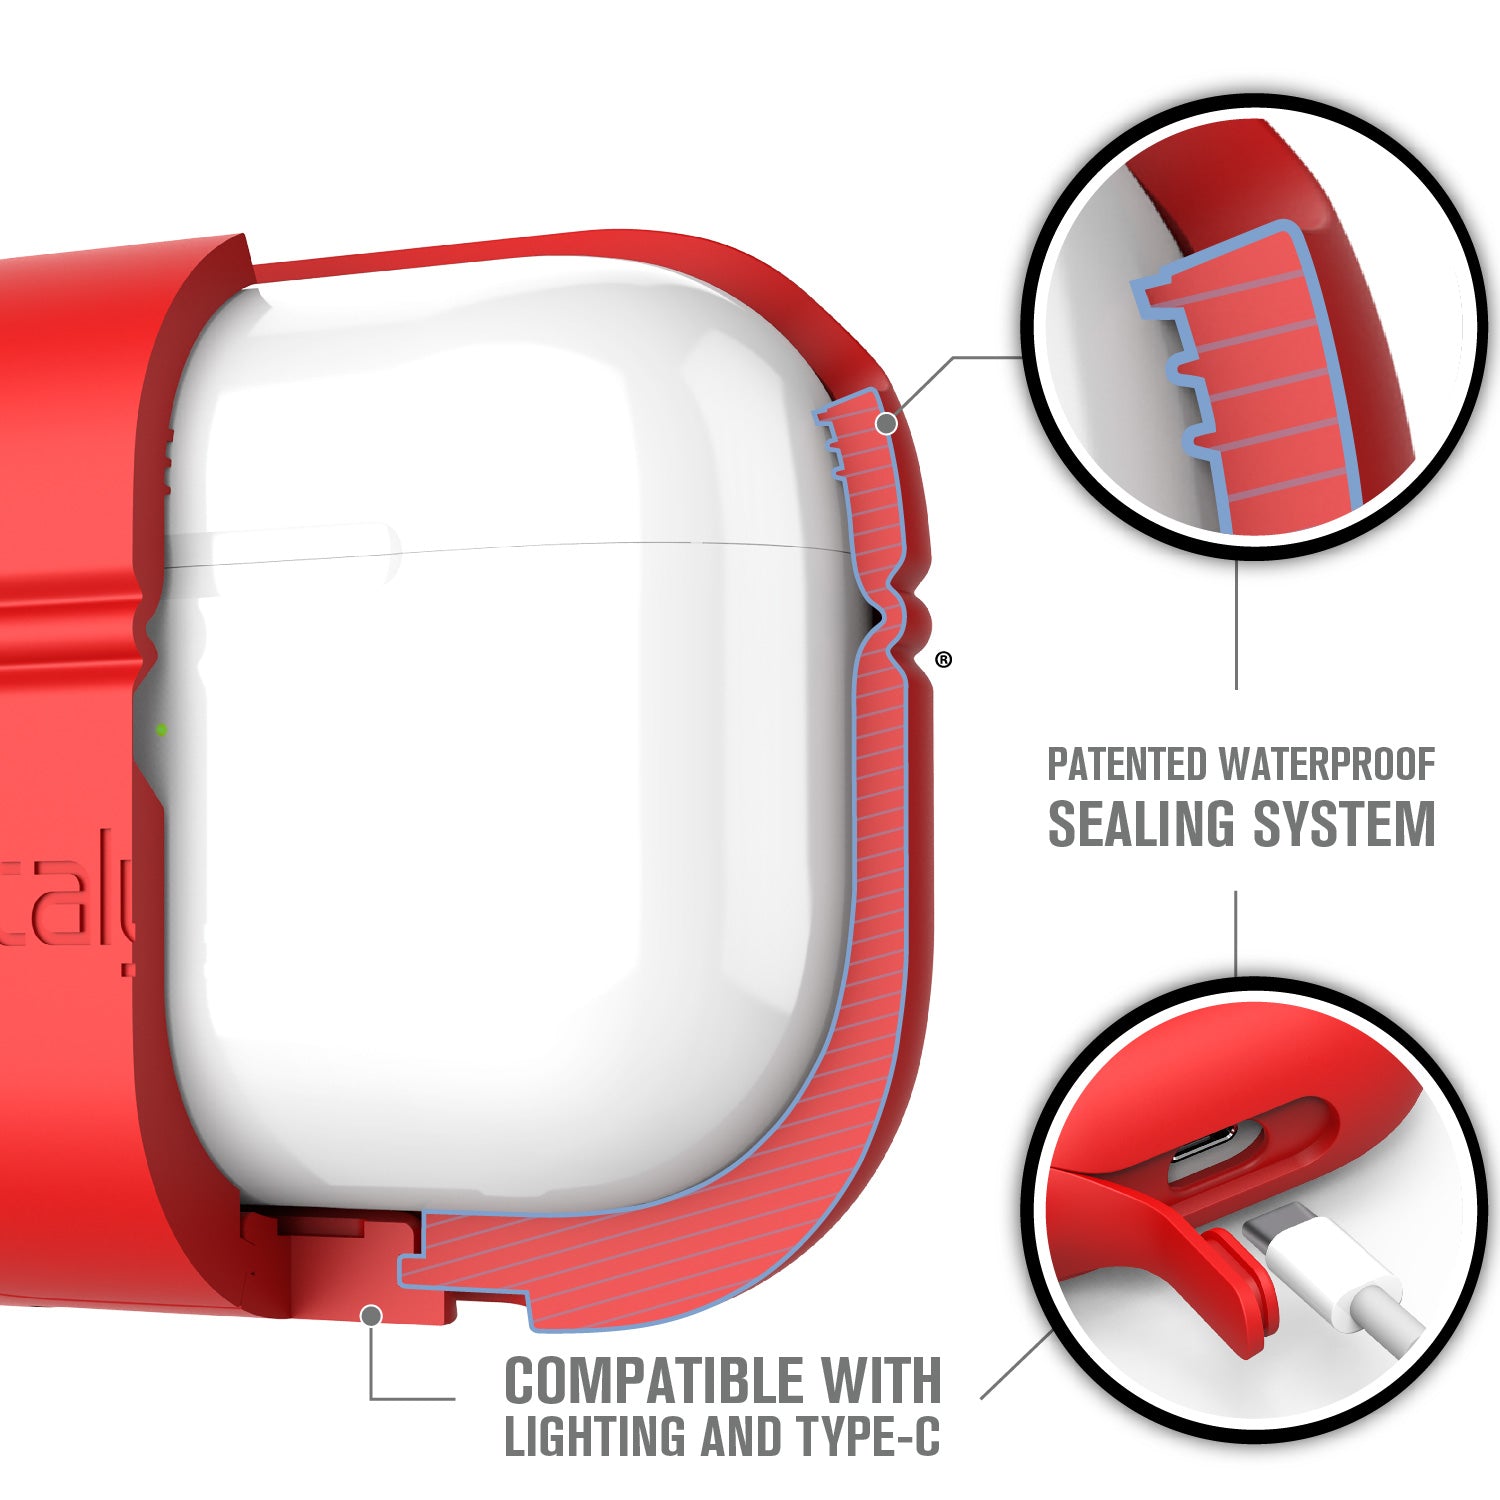 catalyst airpods pro gen 2 1 waterproof case carabiner special edition red showing the patented waterproof sealing system texts reads patented waterproof sealing system compatible with lightning and type c